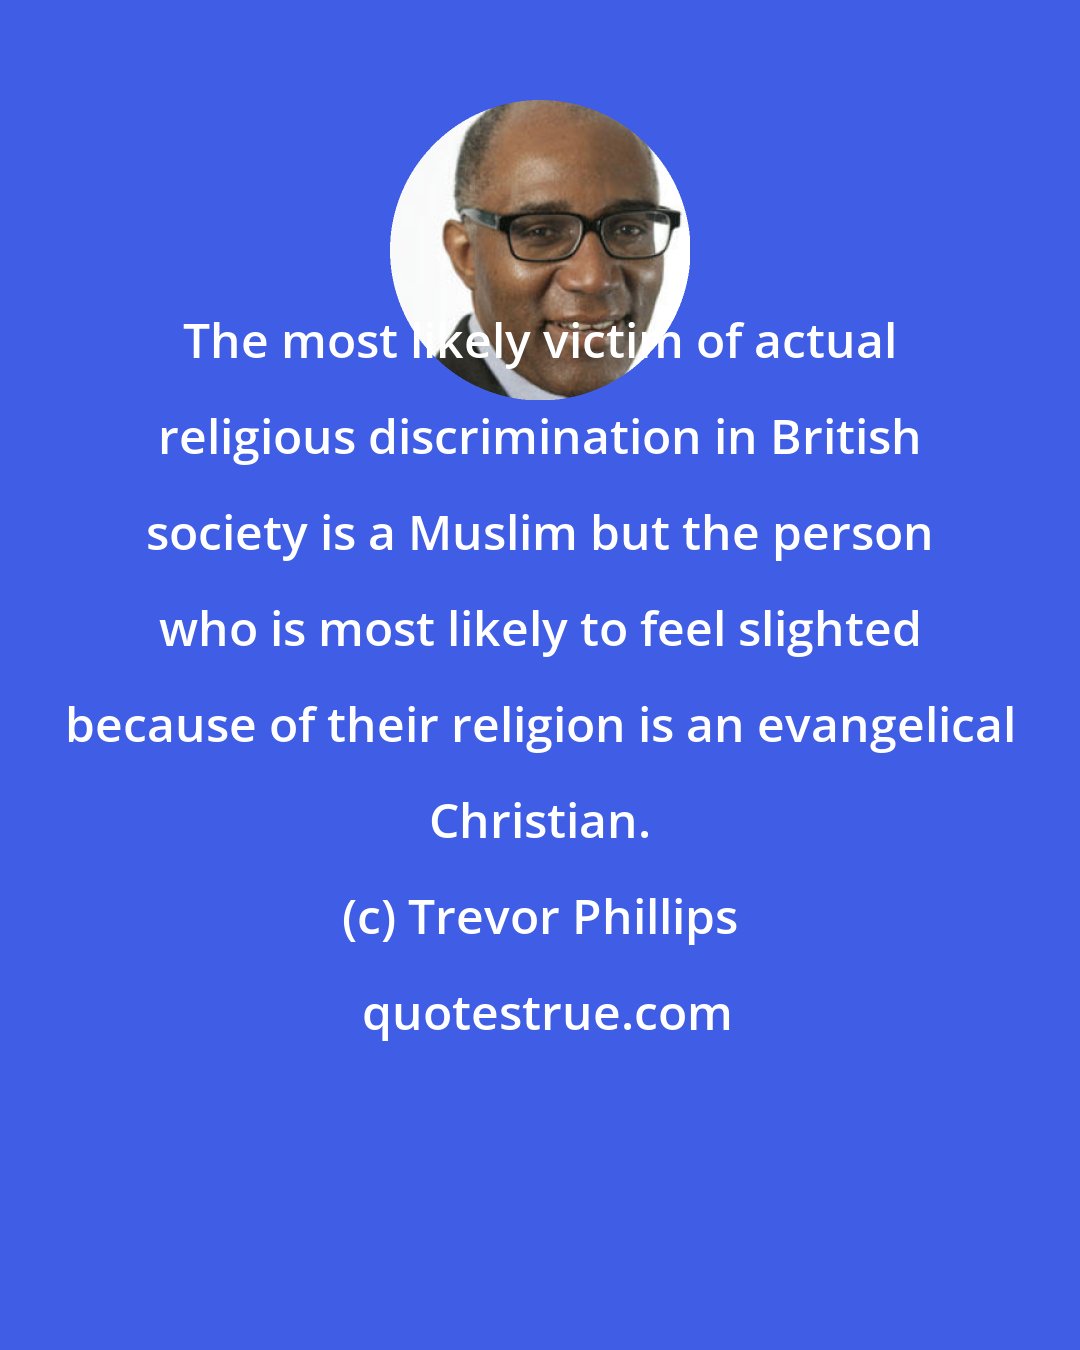 Trevor Phillips: The most likely victim of actual religious discrimination in British society is a Muslim but the person who is most likely to feel slighted because of their religion is an evangelical Christian.